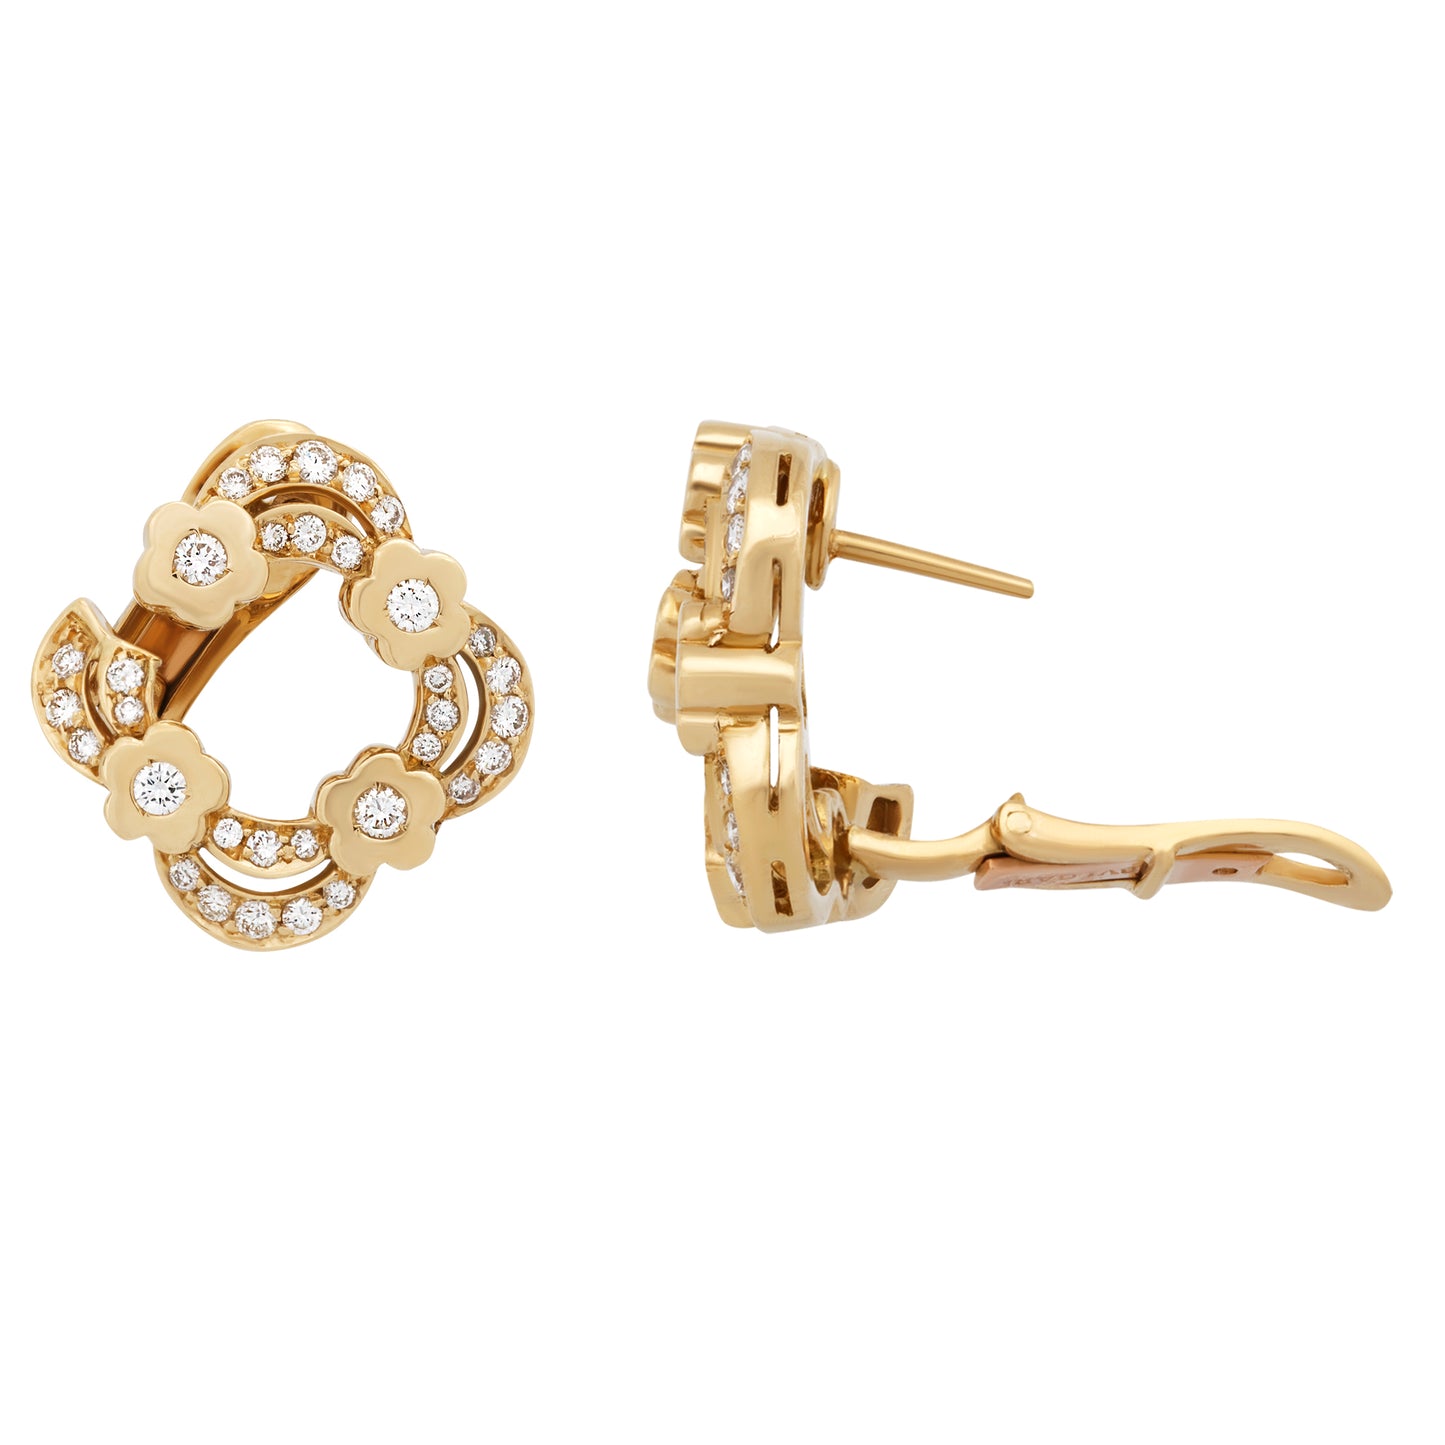 Load image into Gallery viewer, Bvlgari 18K Yellow Gold Diamond Open Flower Earrings
